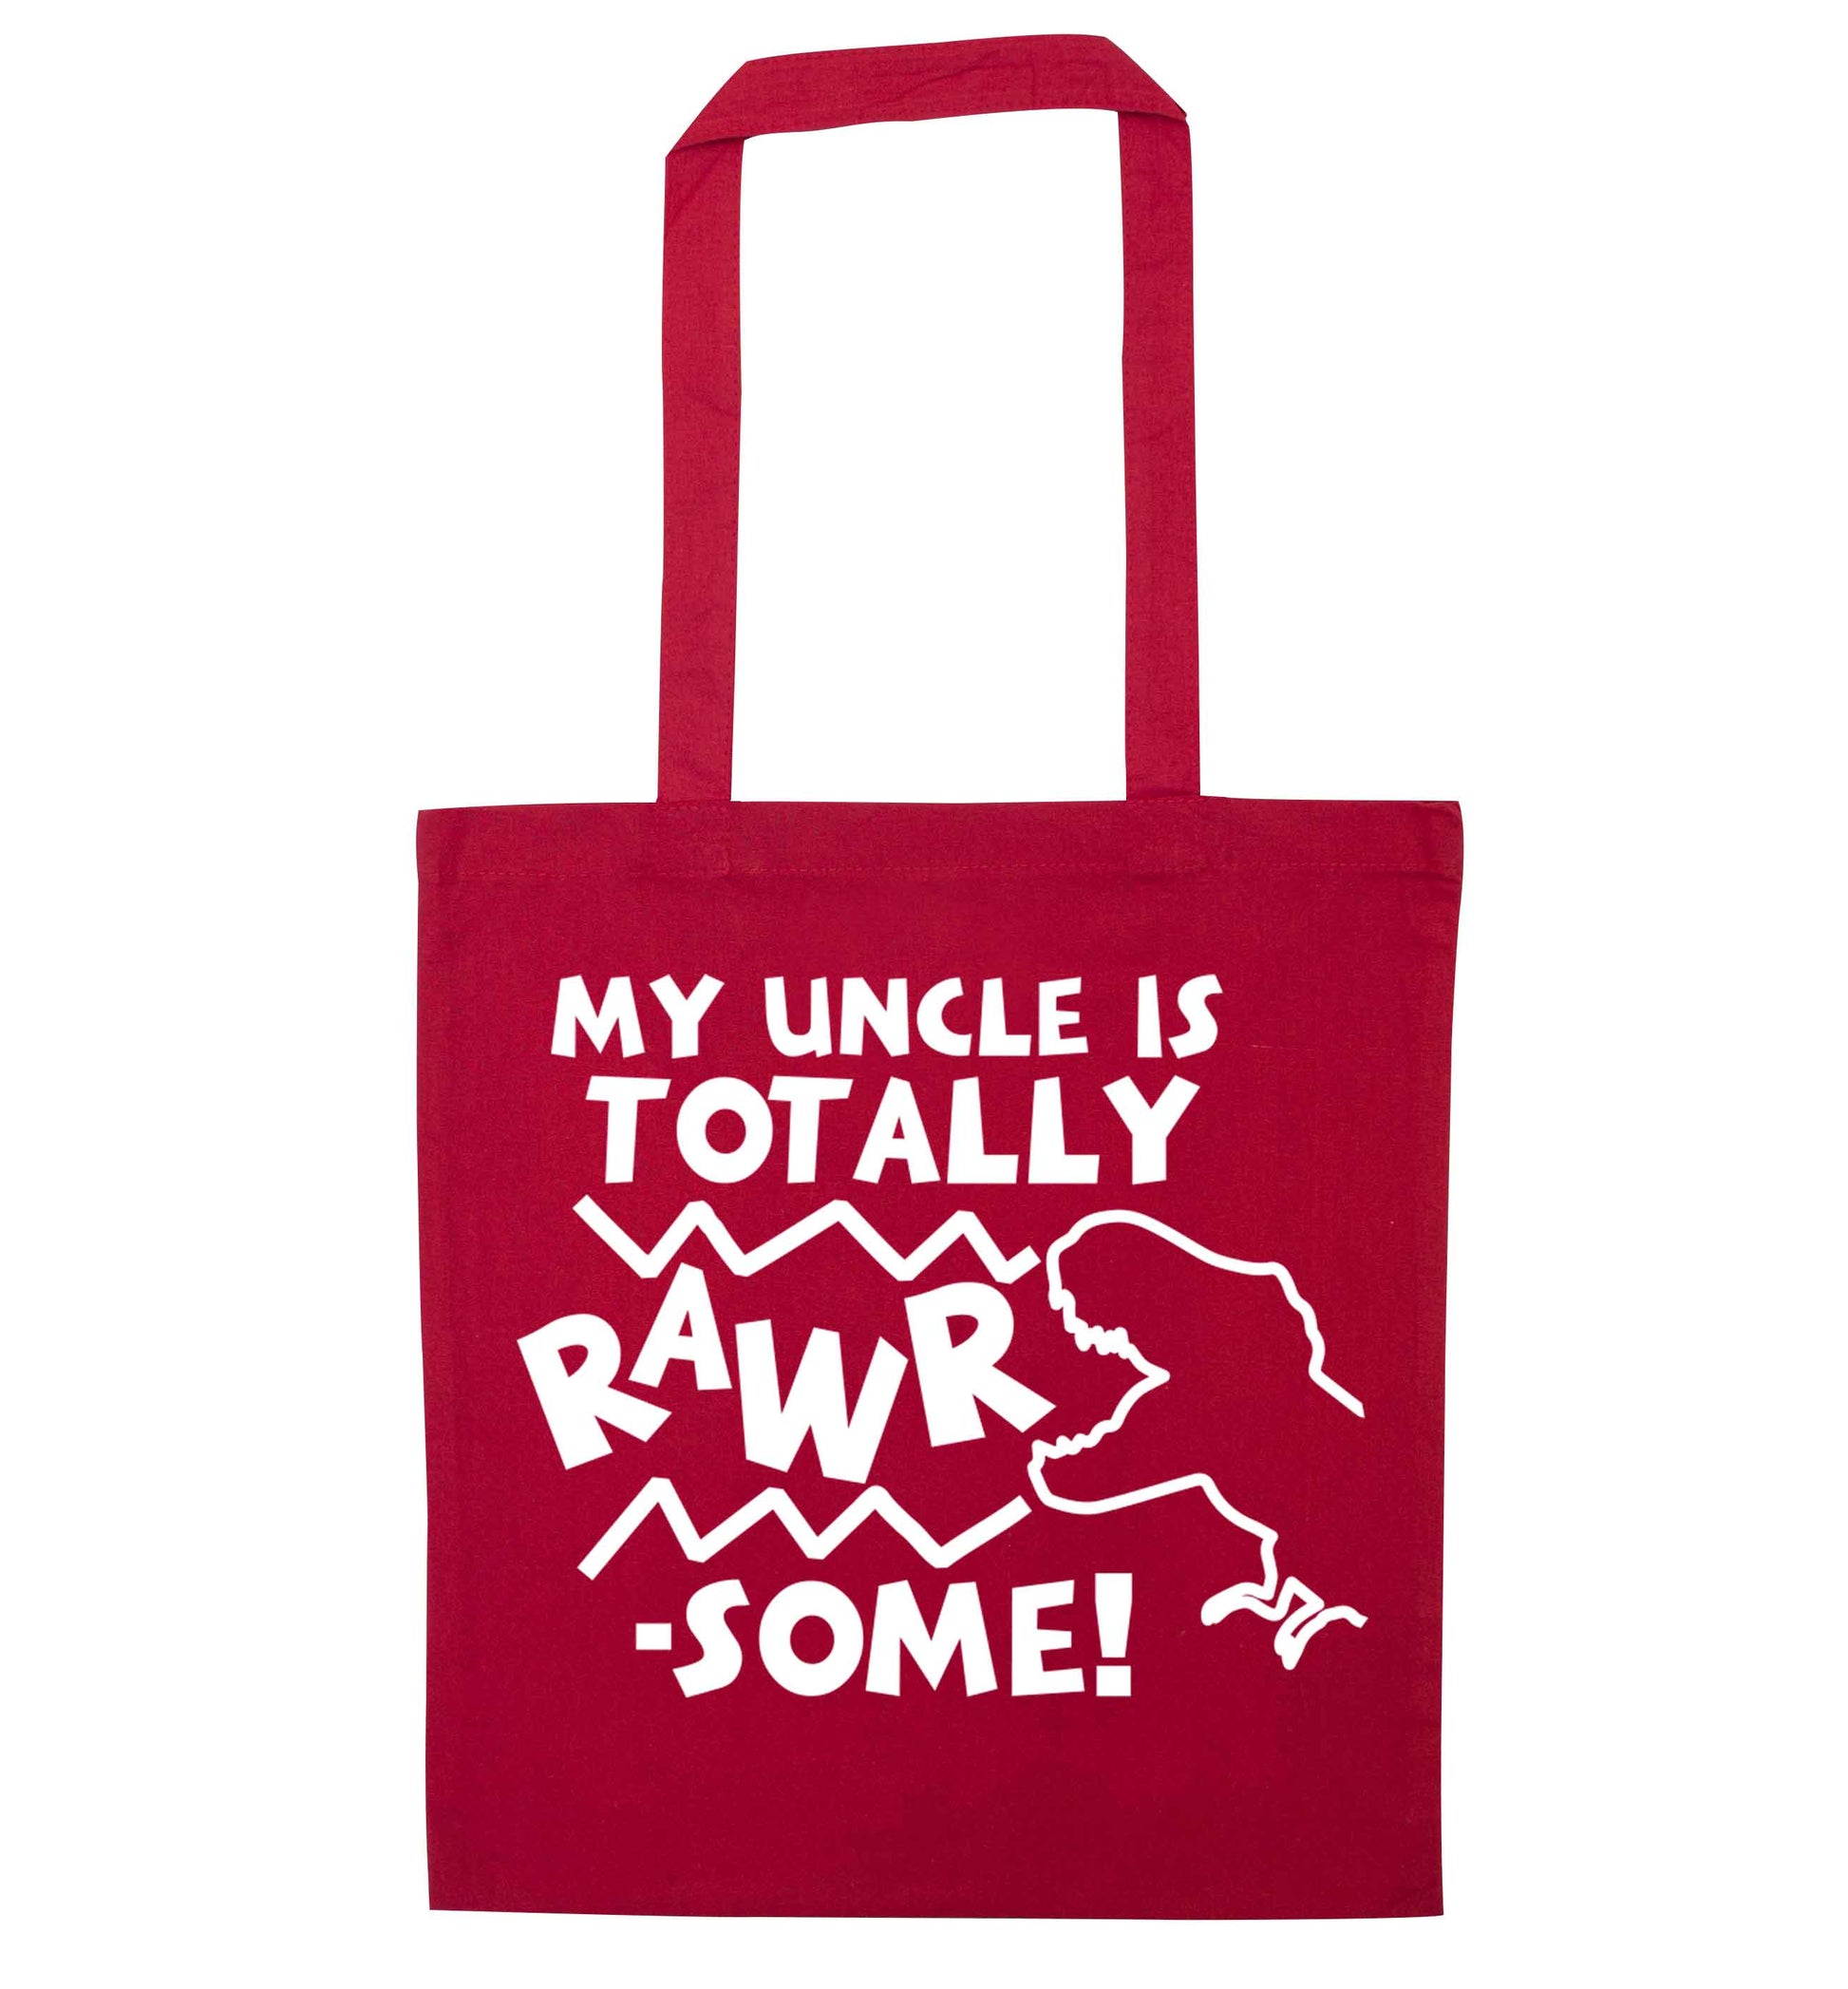 My uncle is totally rawrsome red tote bag